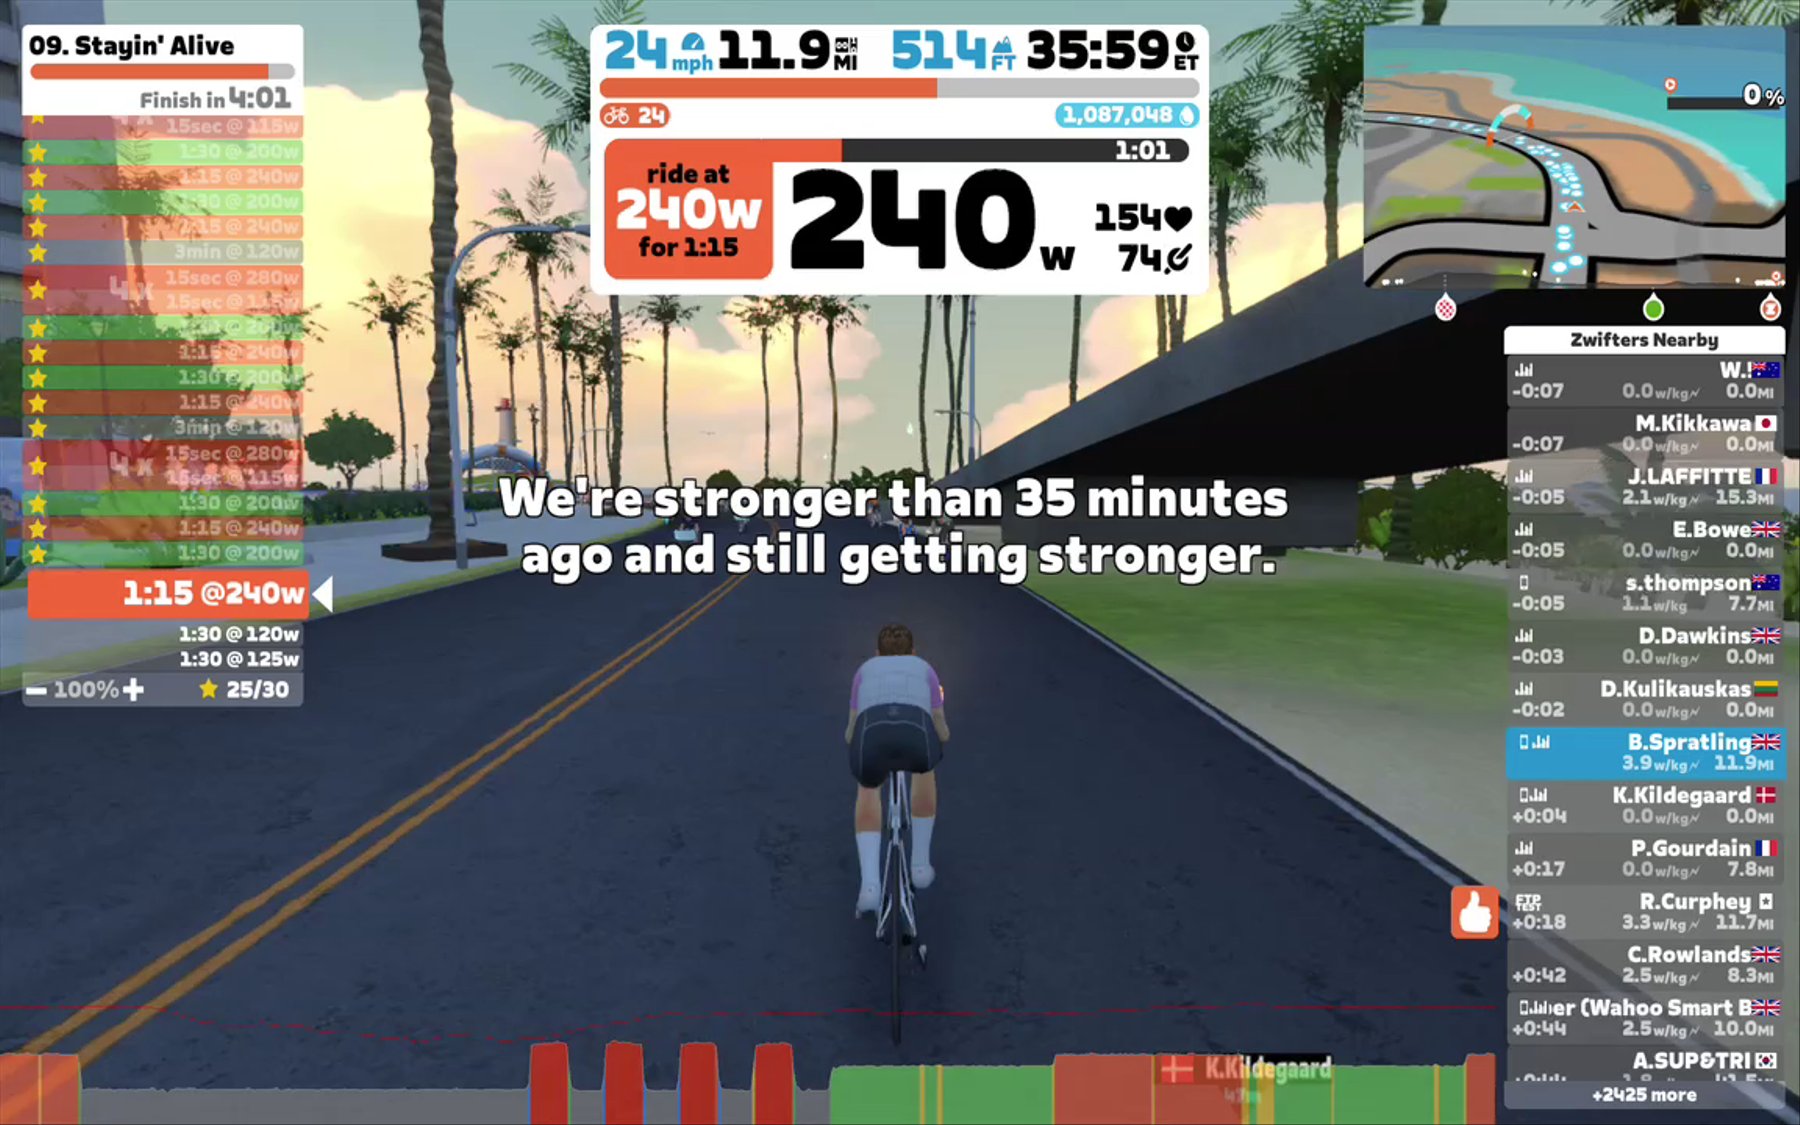 Zwift - 09. Stayin' Alive on Muir And The Mountain in Watopia